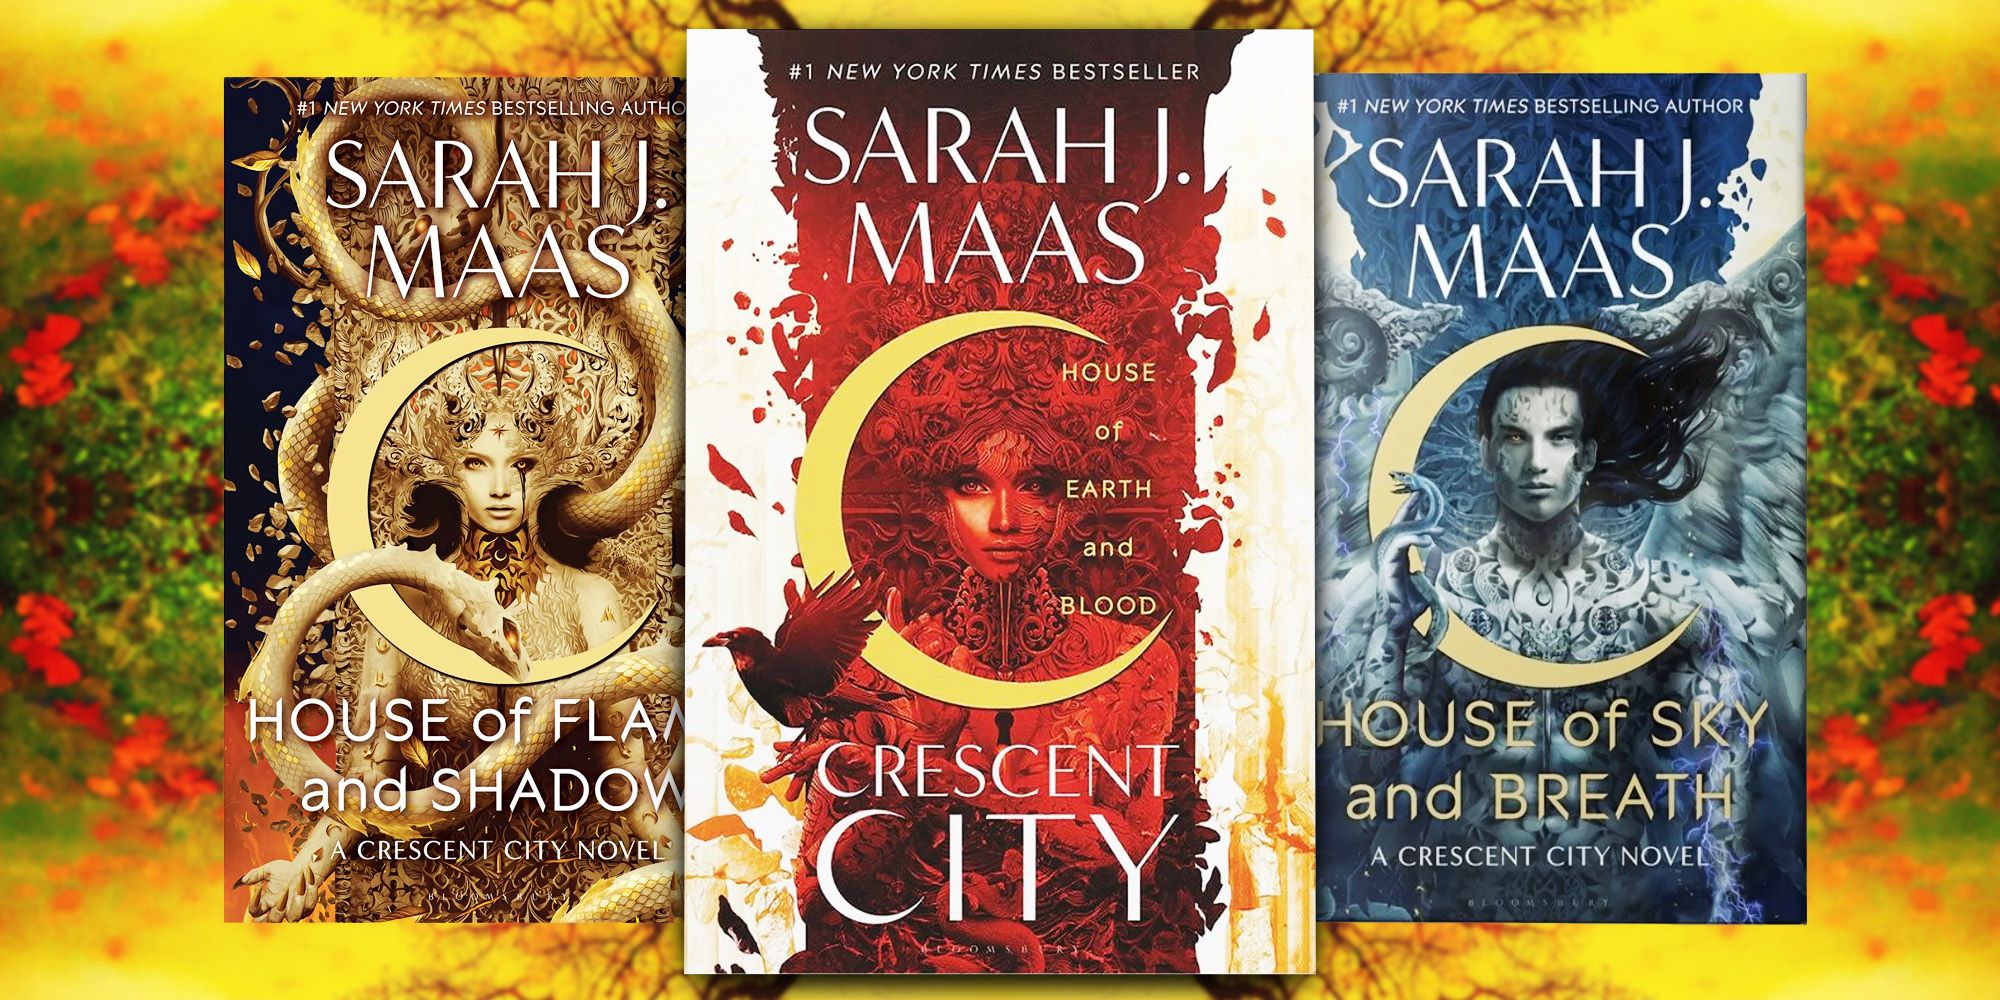 The covers for all three Crescent City books against a red, green, and yellow background